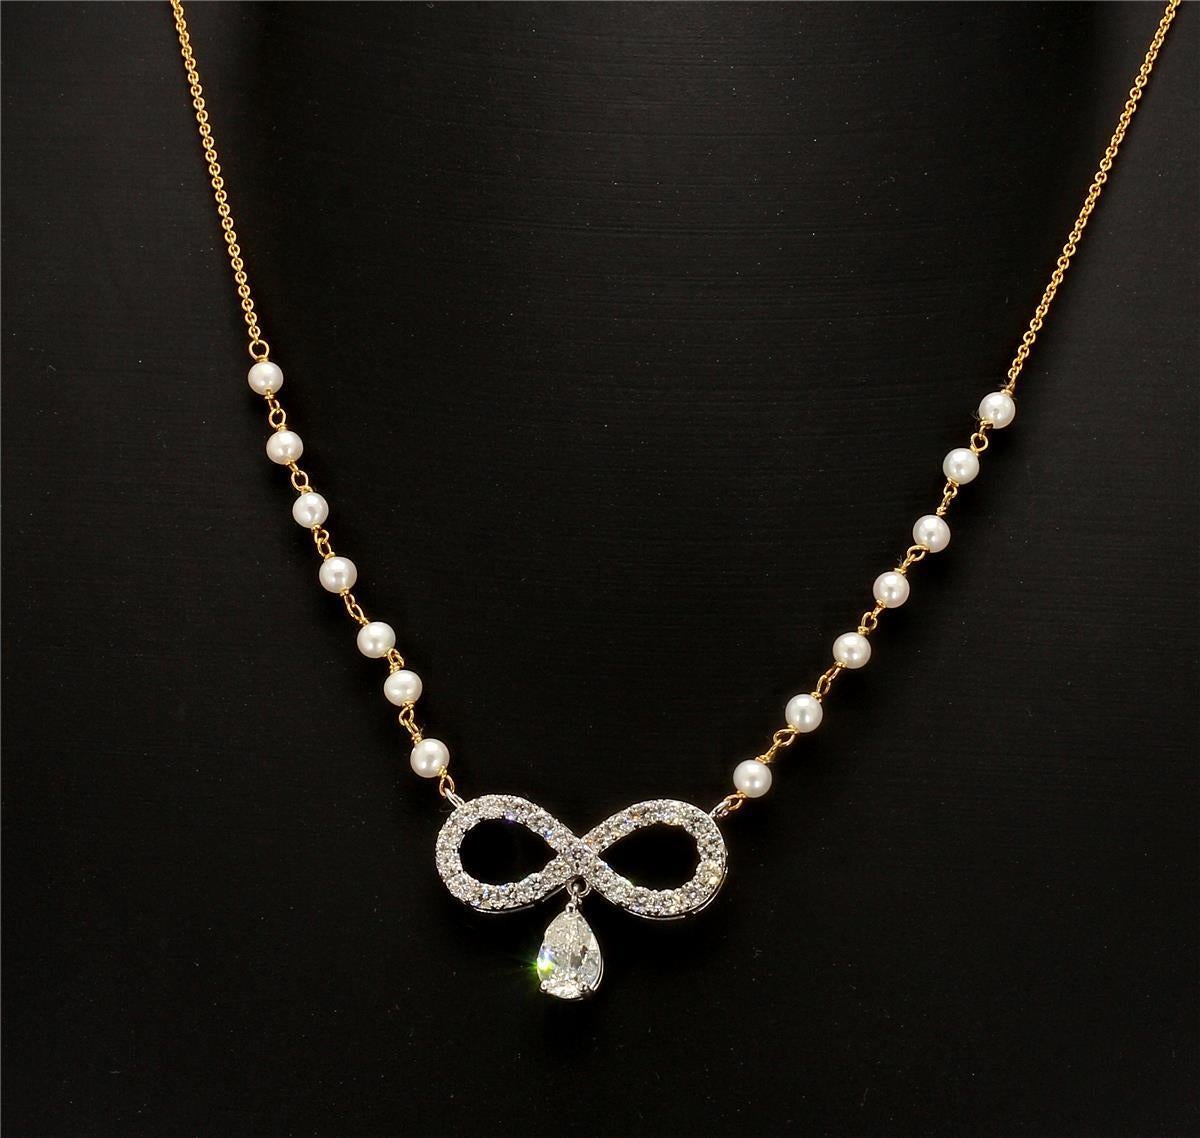 **All jewellery is hallmarked with gold purity and diamond weight for your peace of mind**

**This design is one-of-a-kind and may not be reproduced, this is handmade**

This stunning Infinity design necklace is crafted with natural diamonds and